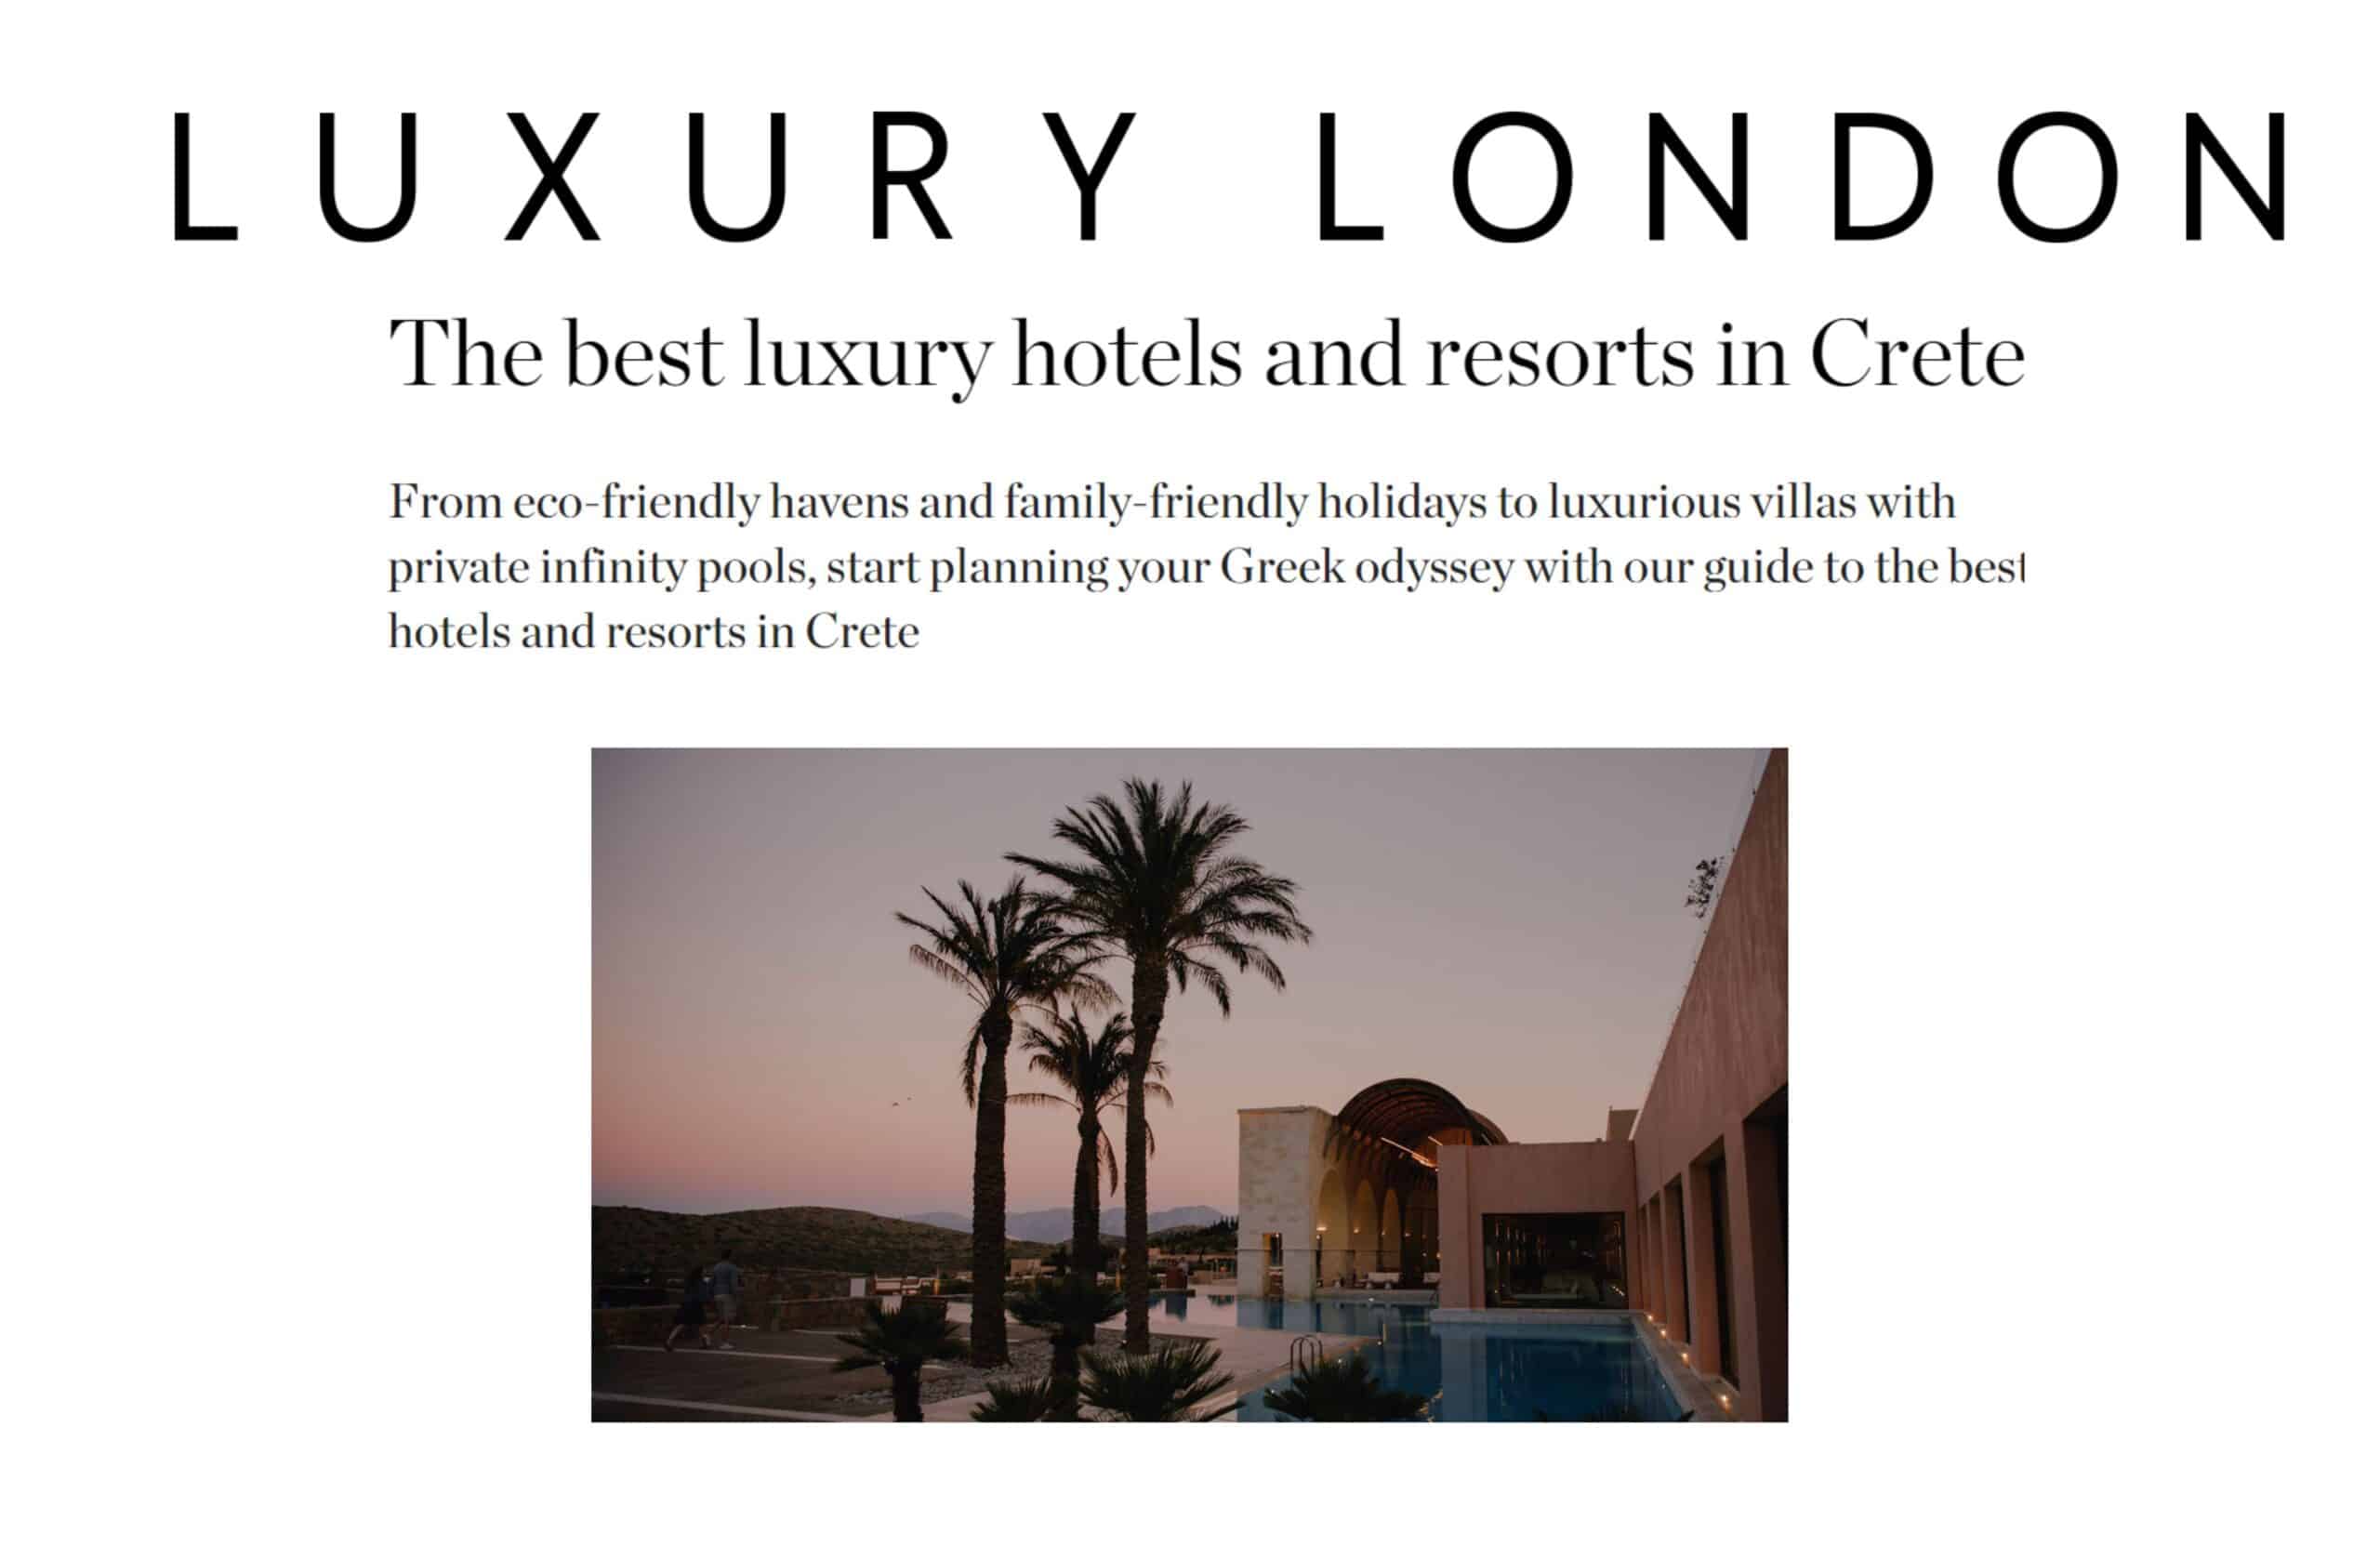 The Best Luxury Hotels And Resorts In Crete By Mhairi Mann In Luxury London